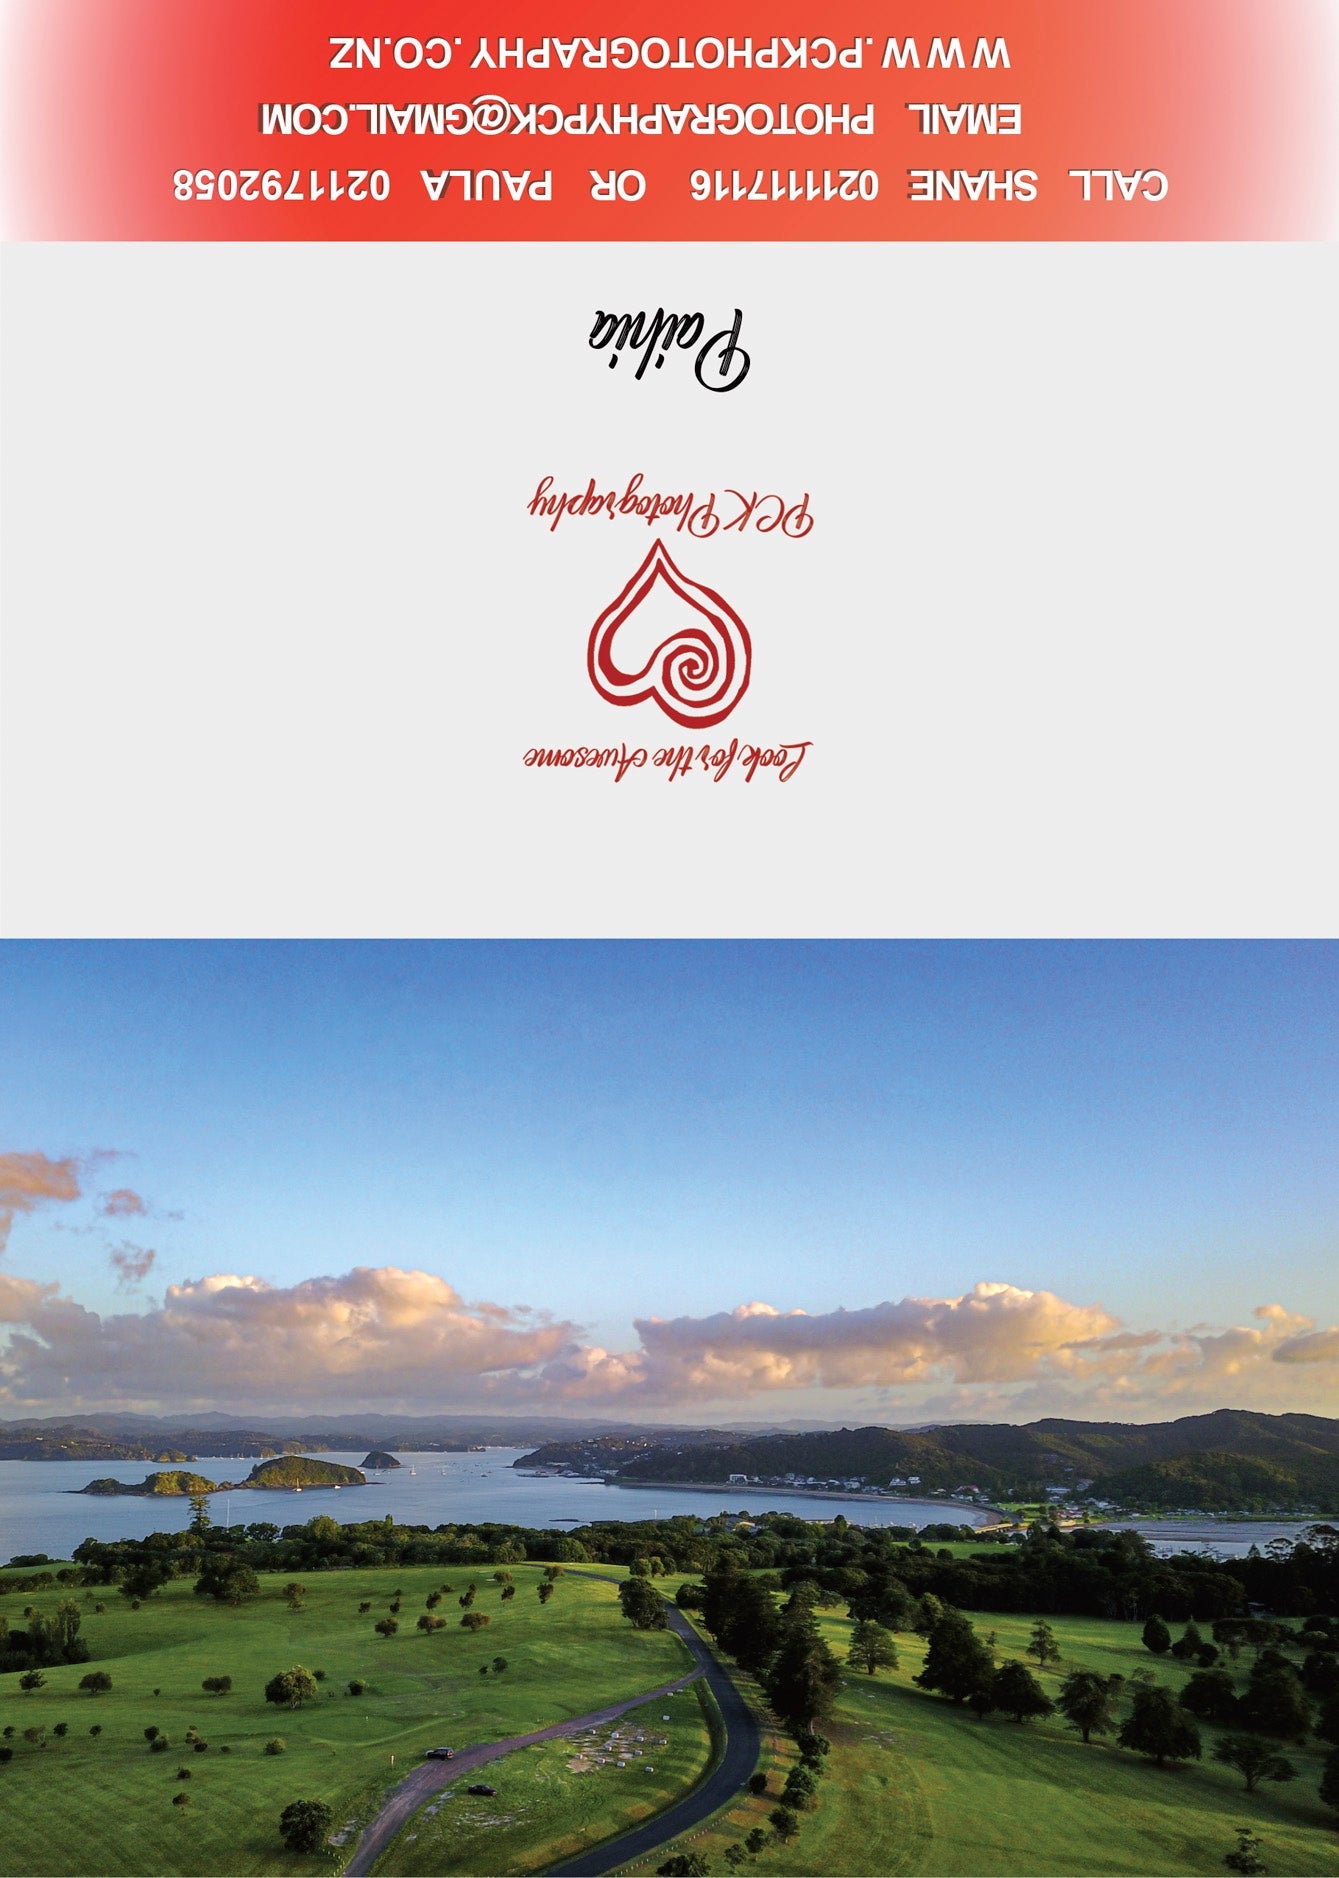 Paihia Drone Greeting Card - PCK Photography